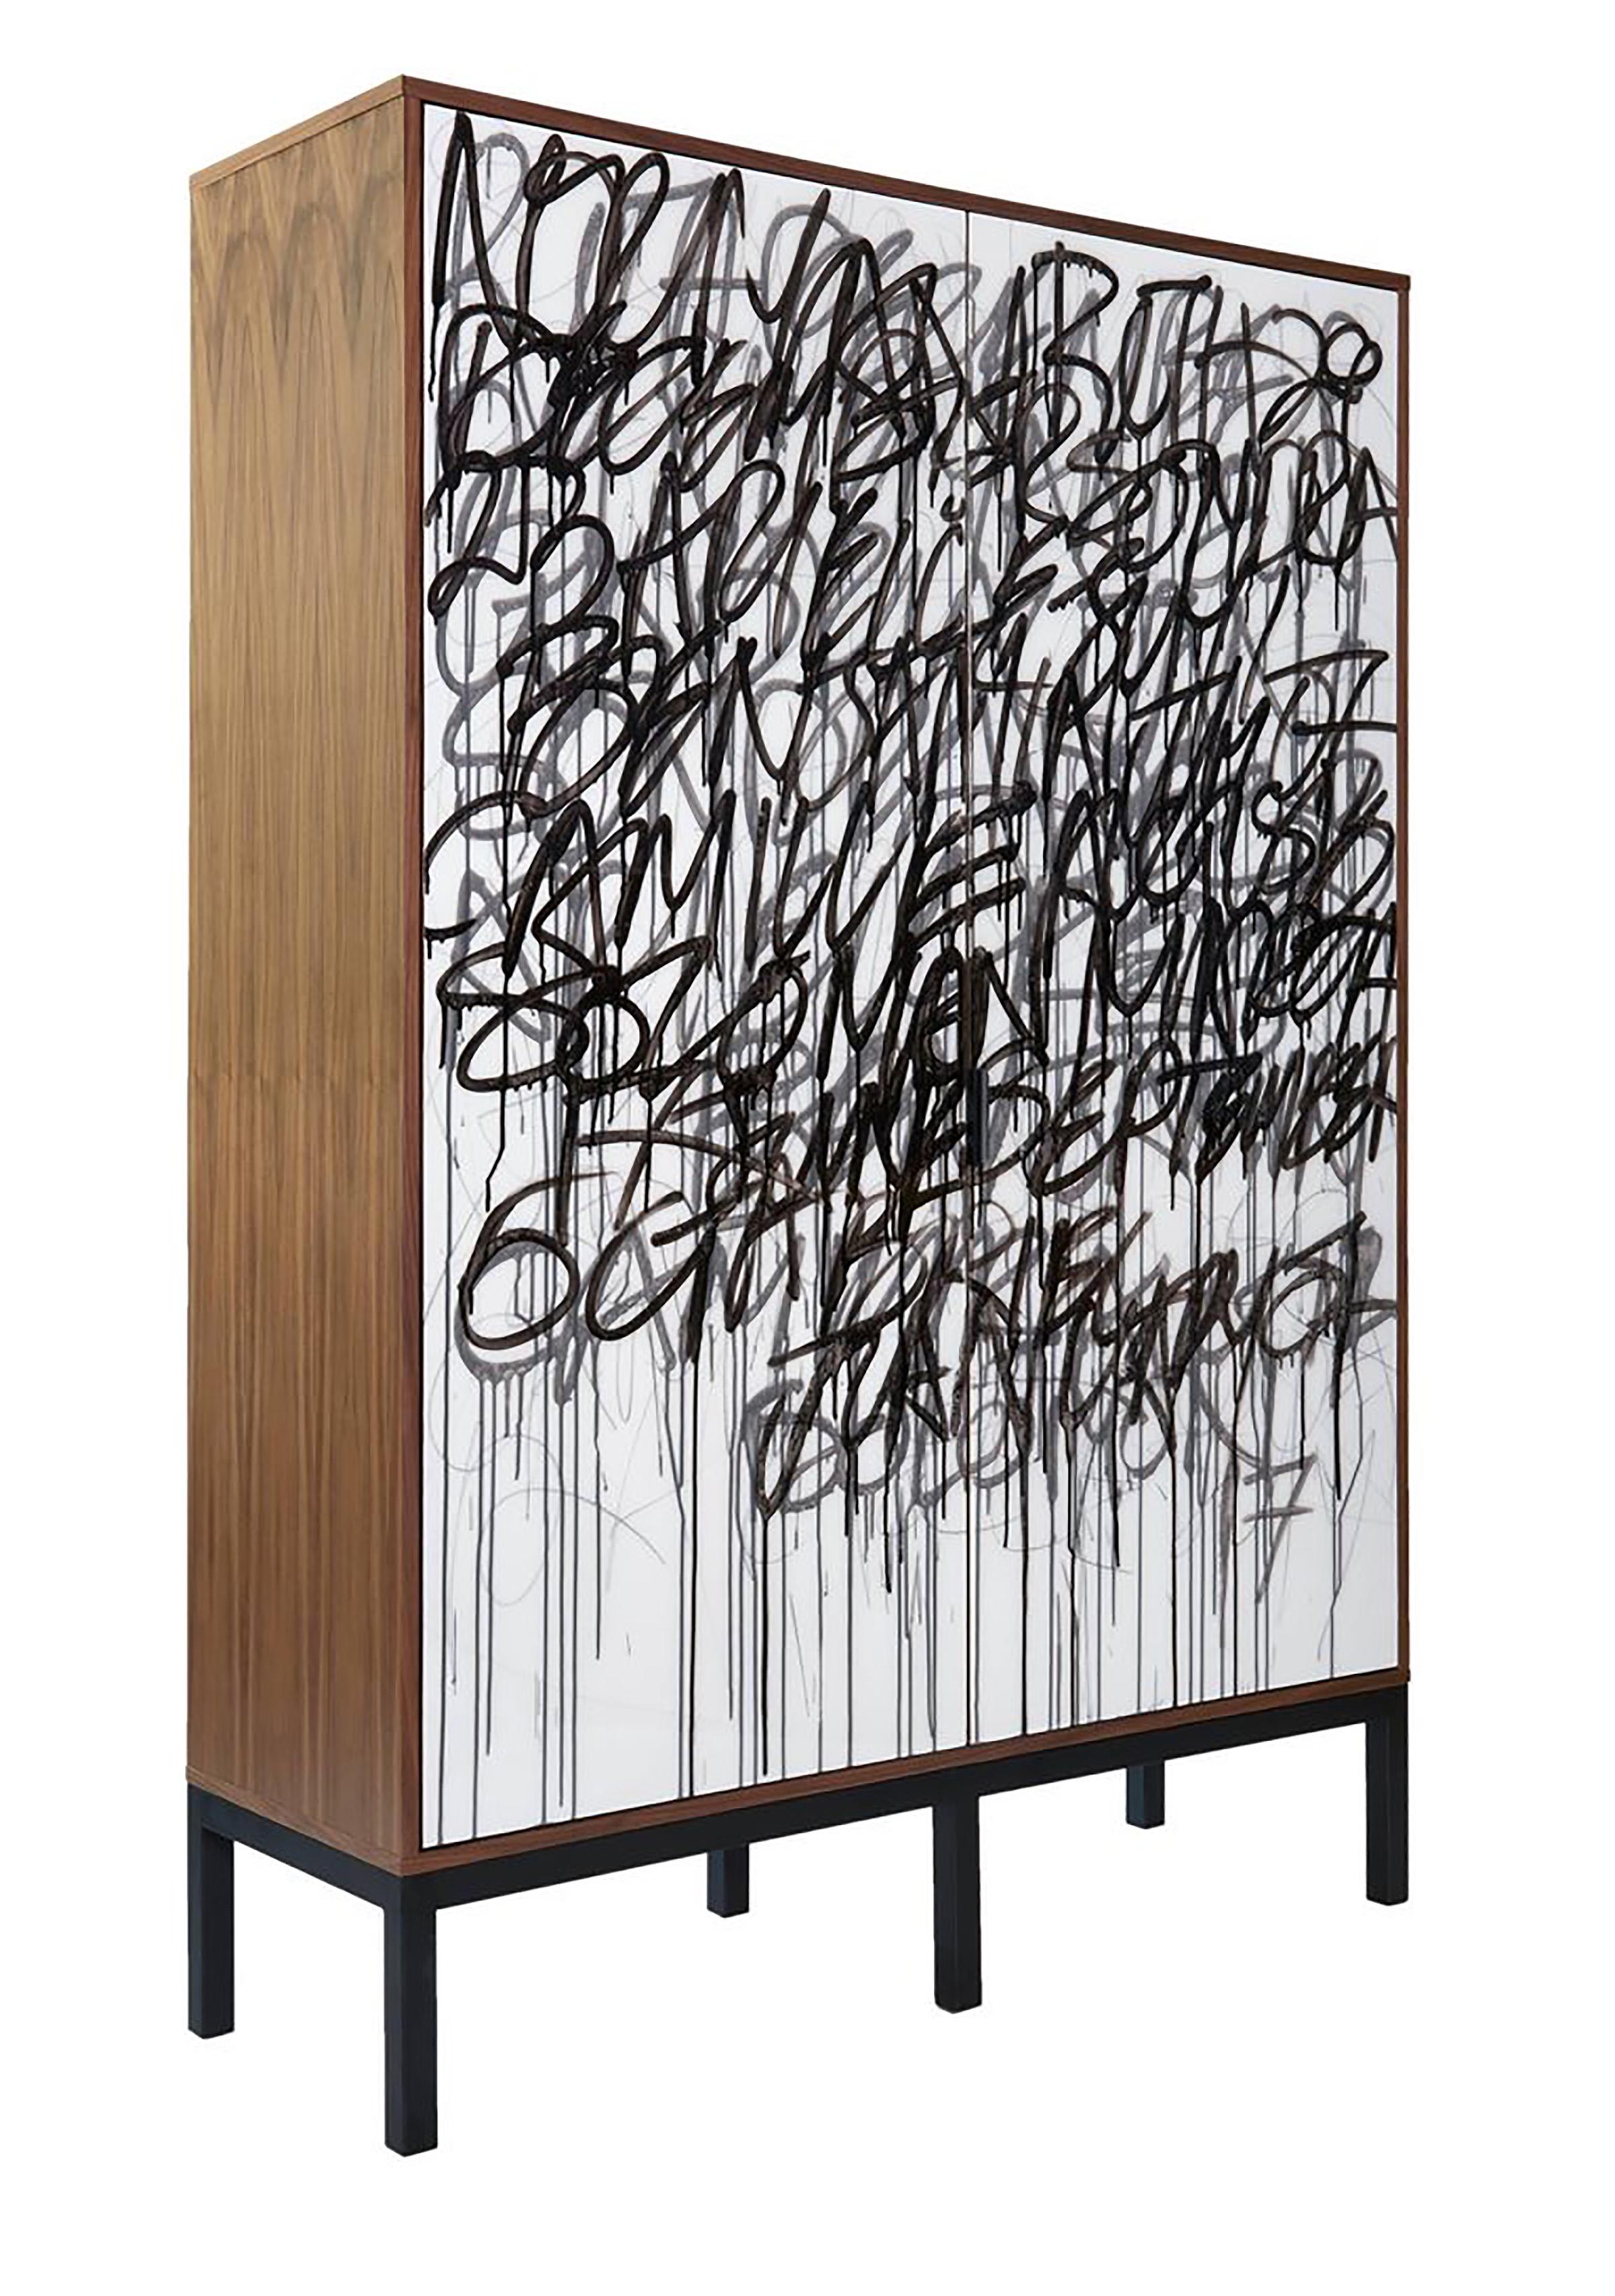 Our 'Say it Again' armoire is creating using graphic, calligraphy inspired, graffiti artwork.  The cabinet is designed and finish in our Toronto studio, Morgan Clayhall. The artist is Murray Duncan.

The client can supply